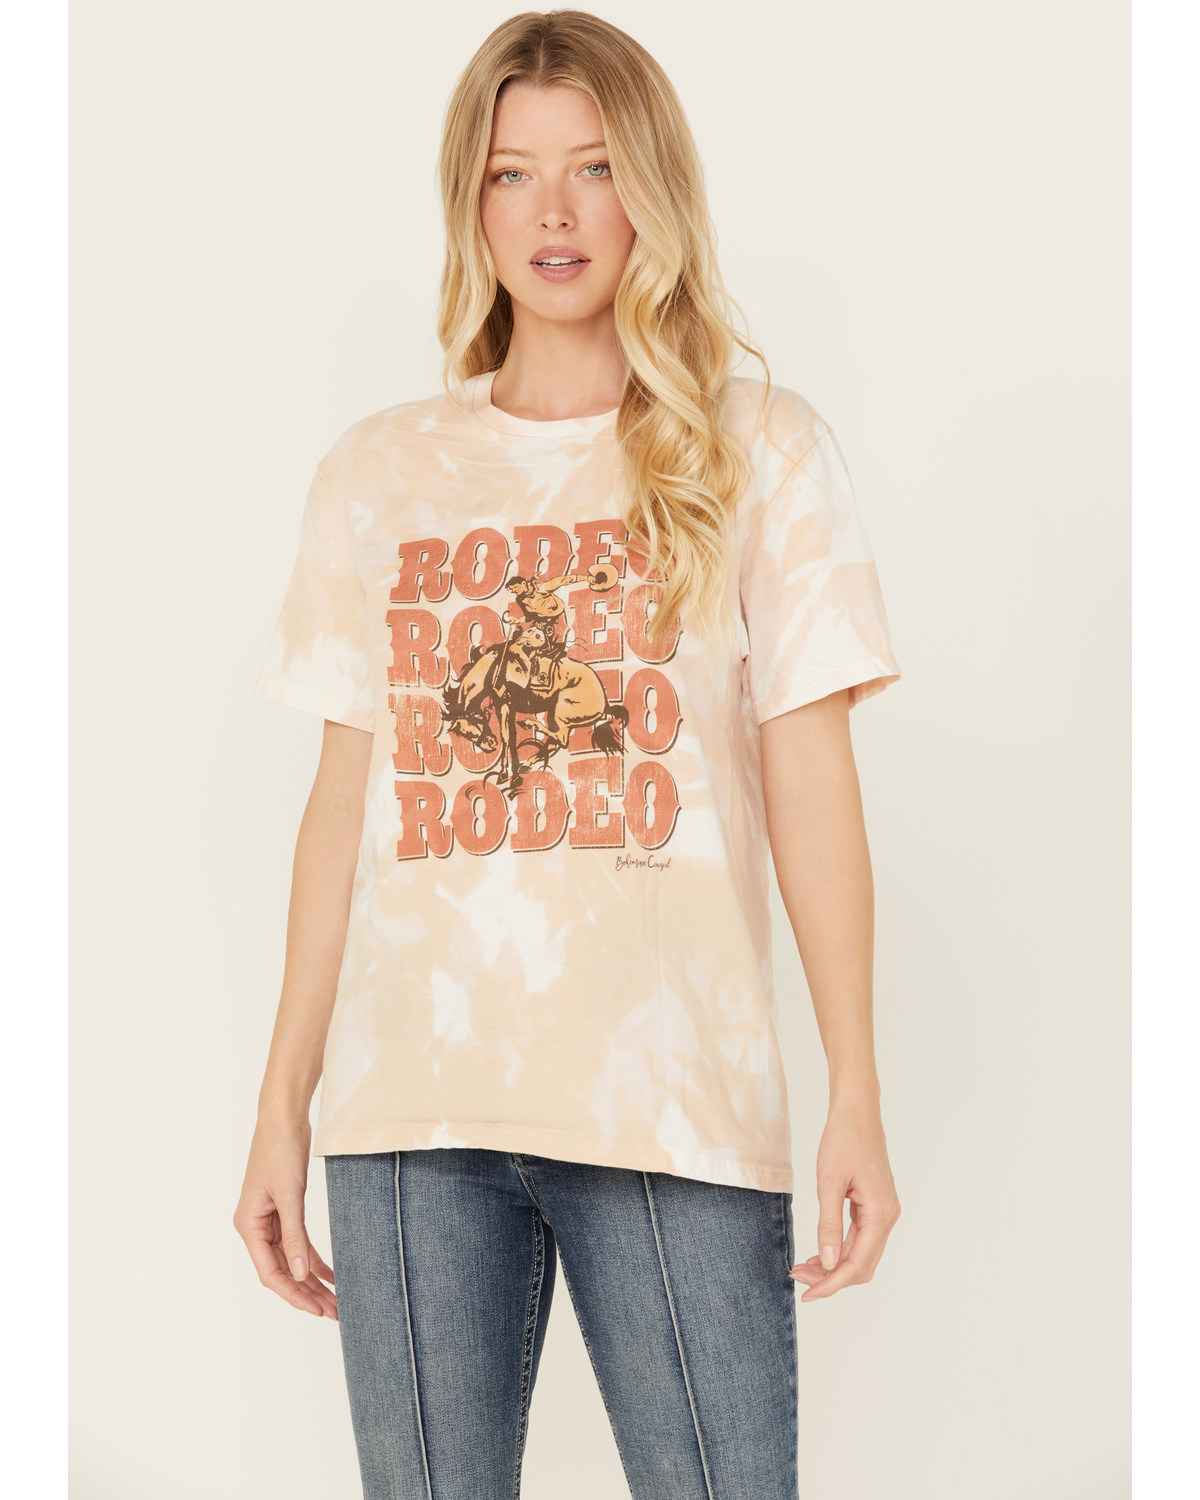 Bohemian Cowgirl Women's Rodeo Bleached Short Sleeve Graphic Tee